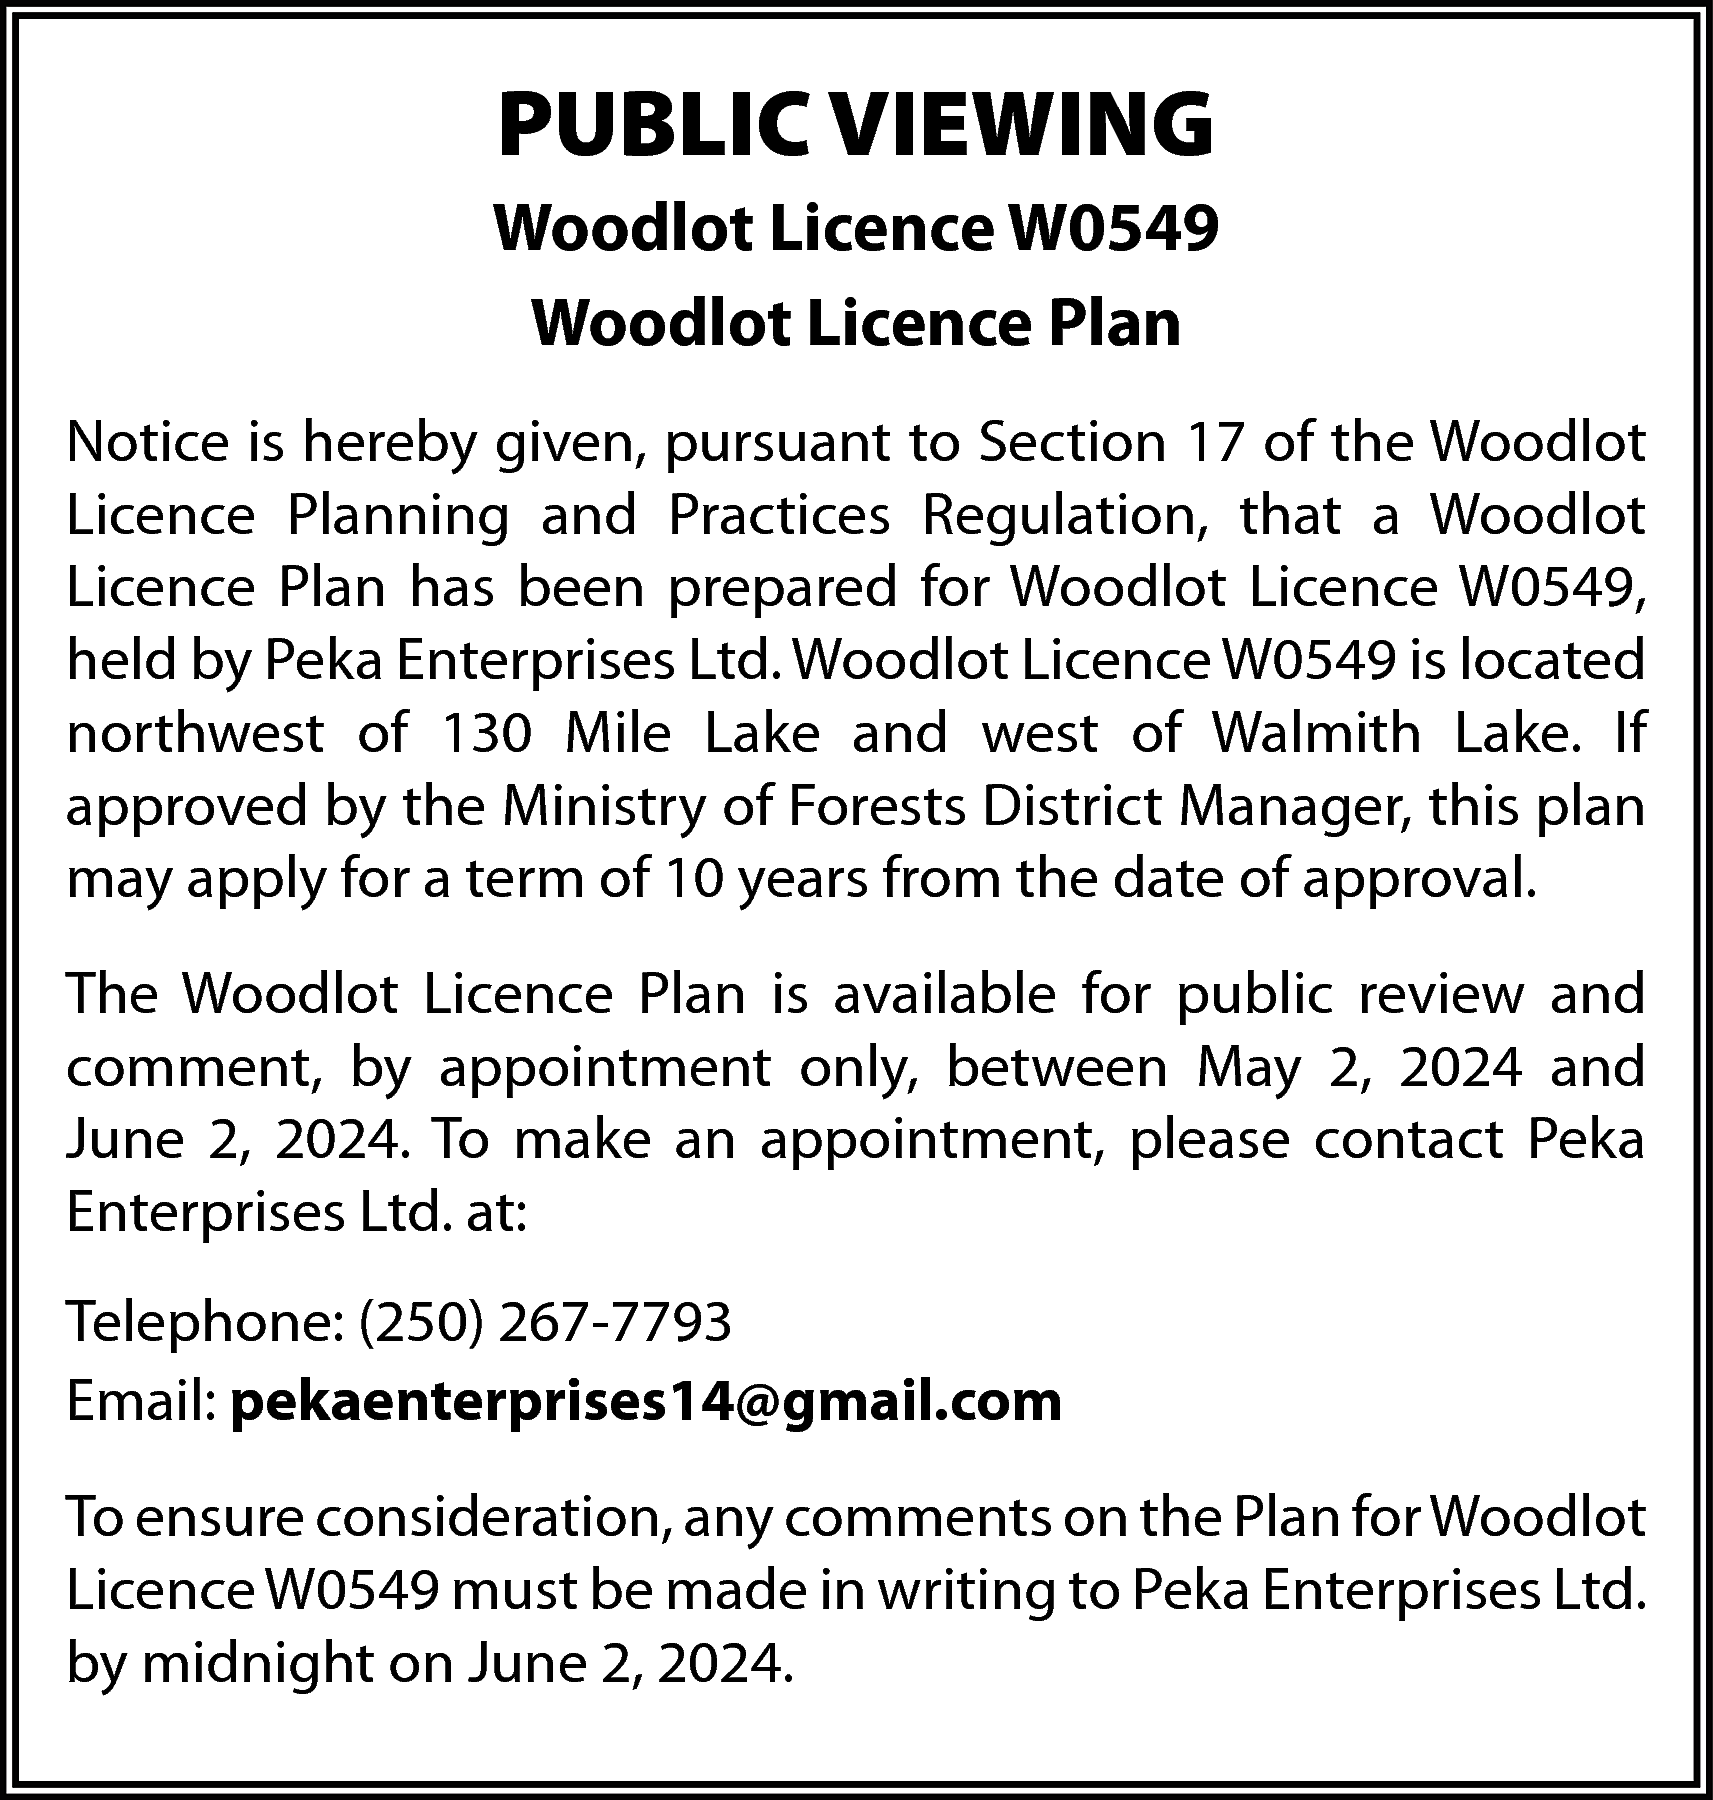 PUBLIC VIEWING <br>Woodlot Licence W0549  PUBLIC VIEWING  Woodlot Licence W0549  Woodlot Licence Plan  Notice is hereby given, pursuant to Section 17 of the Woodlot  Licence Planning and Practices Regulation, that a Woodlot  Licence Plan has been prepared for Woodlot Licence W0549,  held by Peka Enterprises Ltd. Woodlot Licence W0549 is located  northwest of 130 Mile Lake and west of Walmith Lake. If  approved by the Ministry of Forests District Manager, this plan  may apply for a term of 10 years from the date of approval.  The Woodlot Licence Plan is available for public review and  comment, by appointment only, between May 2, 2024 and  June 2, 2024. To make an appointment, please contact Peka  Enterprises Ltd. at:  Telephone: (250) 267-7793  Email: pekaenterprises14@gmail.com  To ensure consideration, any comments on the Plan for Woodlot  Licence W0549 must be made in writing to Peka Enterprises Ltd.  by midnight on June 2, 2024.    